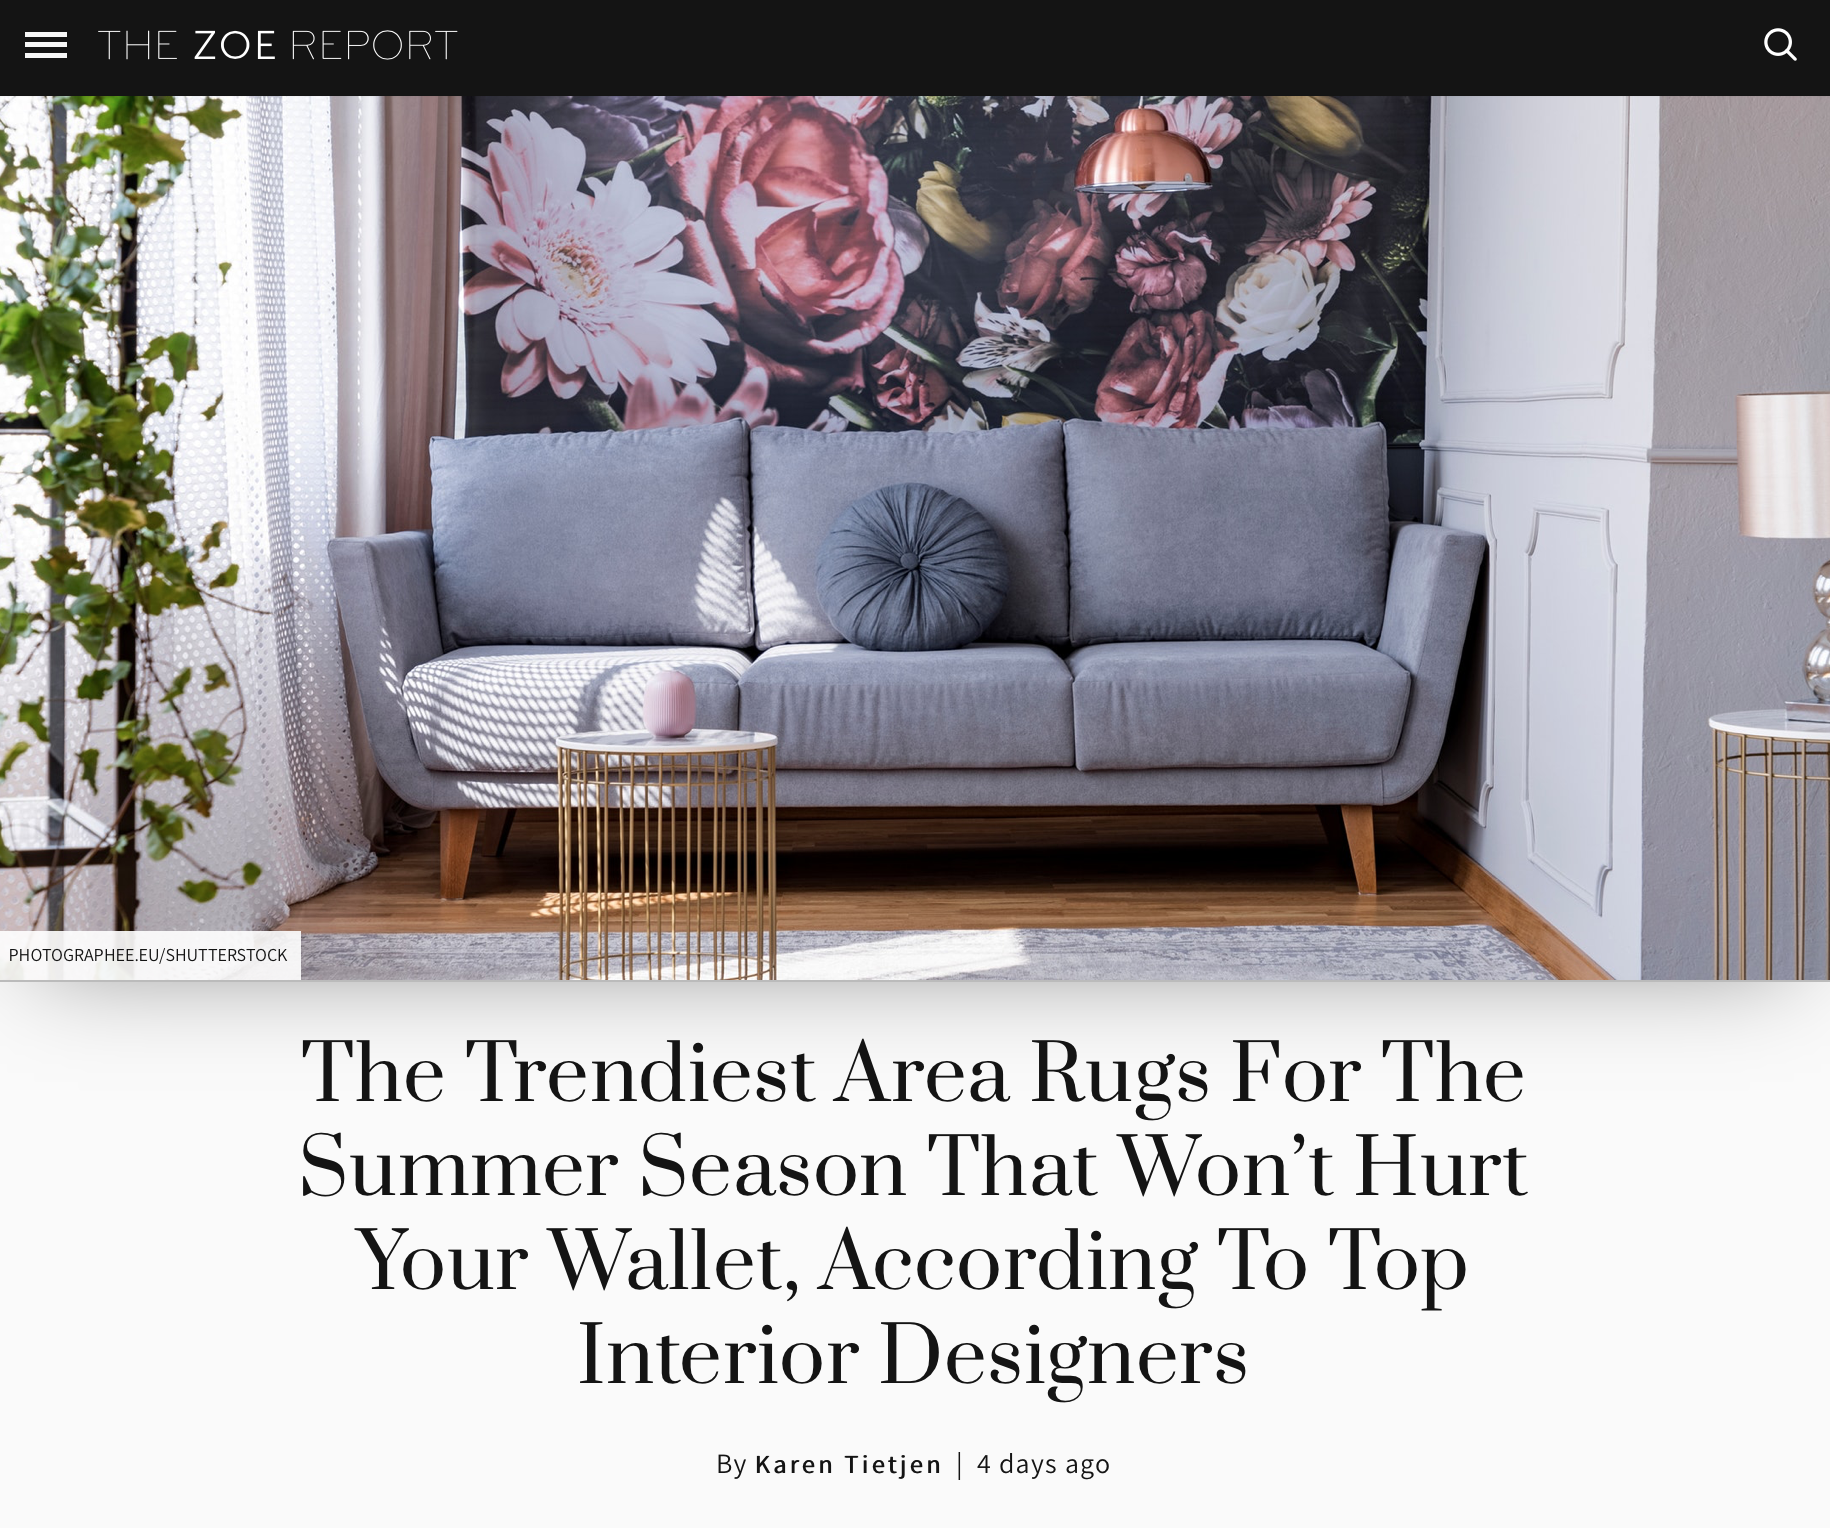 Throw rugs ground a space and delineate areas," explains Lori Dennis, owner of Lori Dennis, Inc. in Los Angeles. "This is especially important in open place rooms where there are no walls separating spaces."